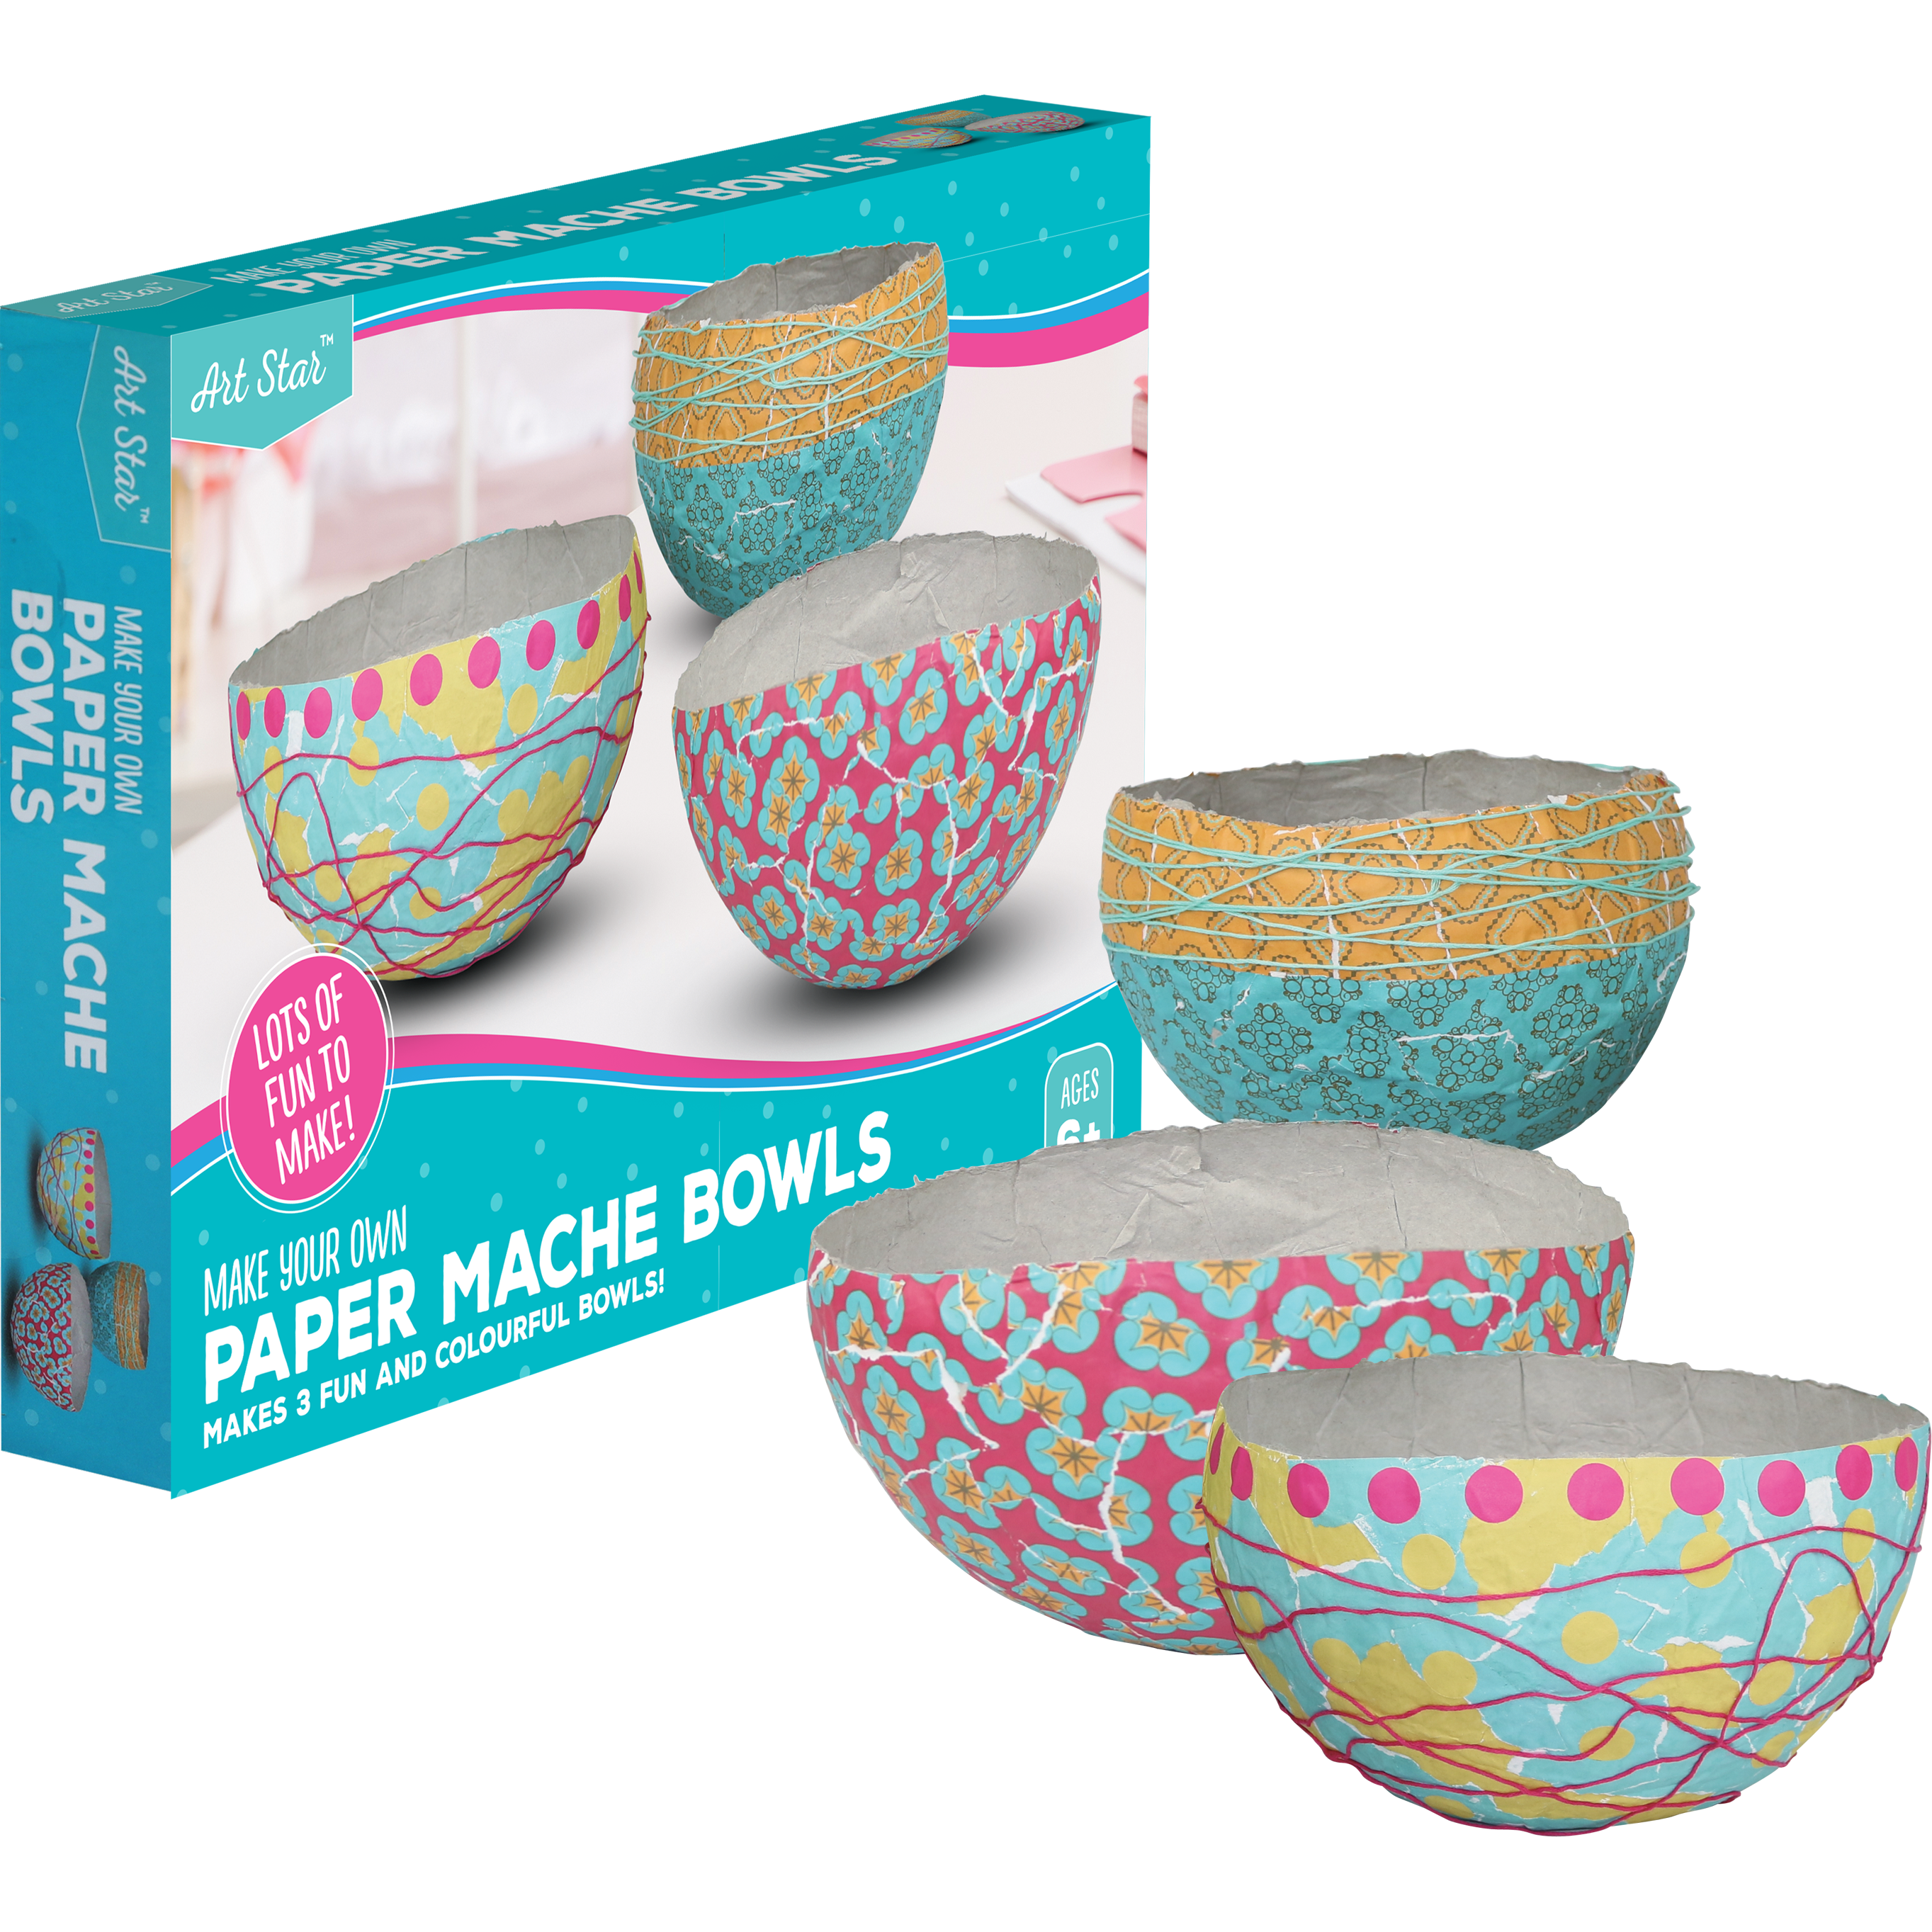 Image of Art Star Make Your Own Paper Mache Bowls Kit